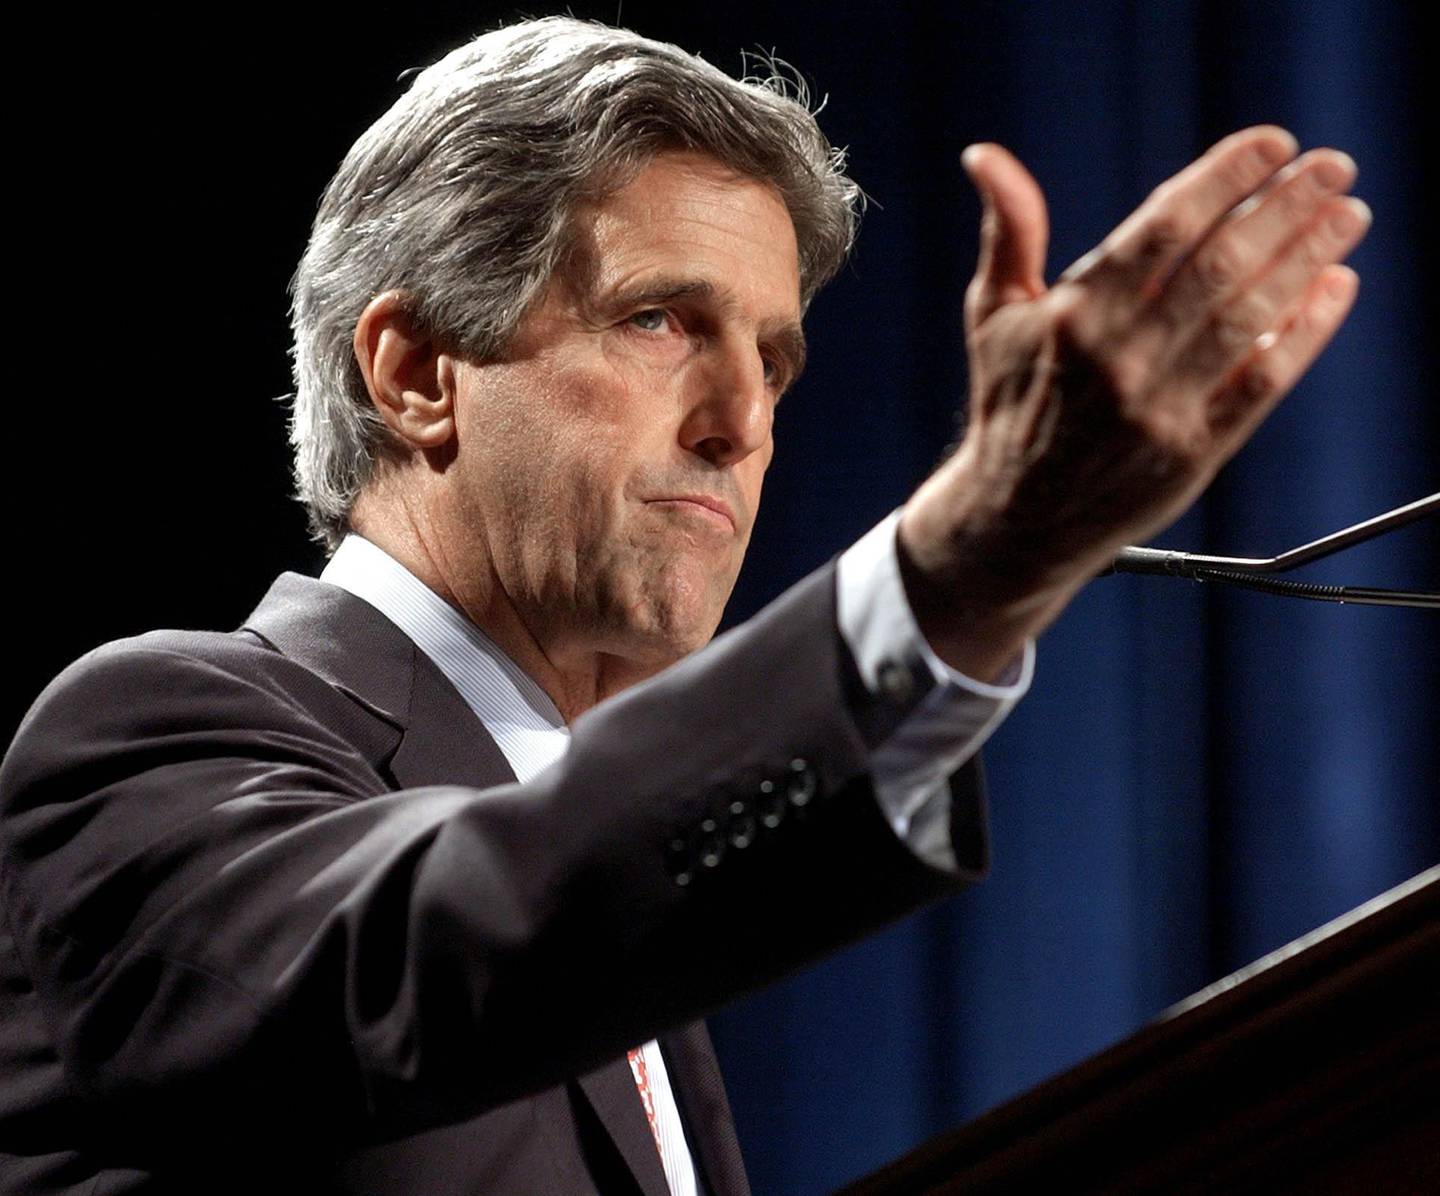 Former Democratic presidential candidate Sen. John Kerry, D0-Mass., addresses a National Head Start Association conference in Orlando, Fla., Friday, May 27, 2005. Kerry touted his plan to provide health care for uninsured children but repeatedly criticized the Bush administration while doing so. (AP Photo/Peter Cosgrove)